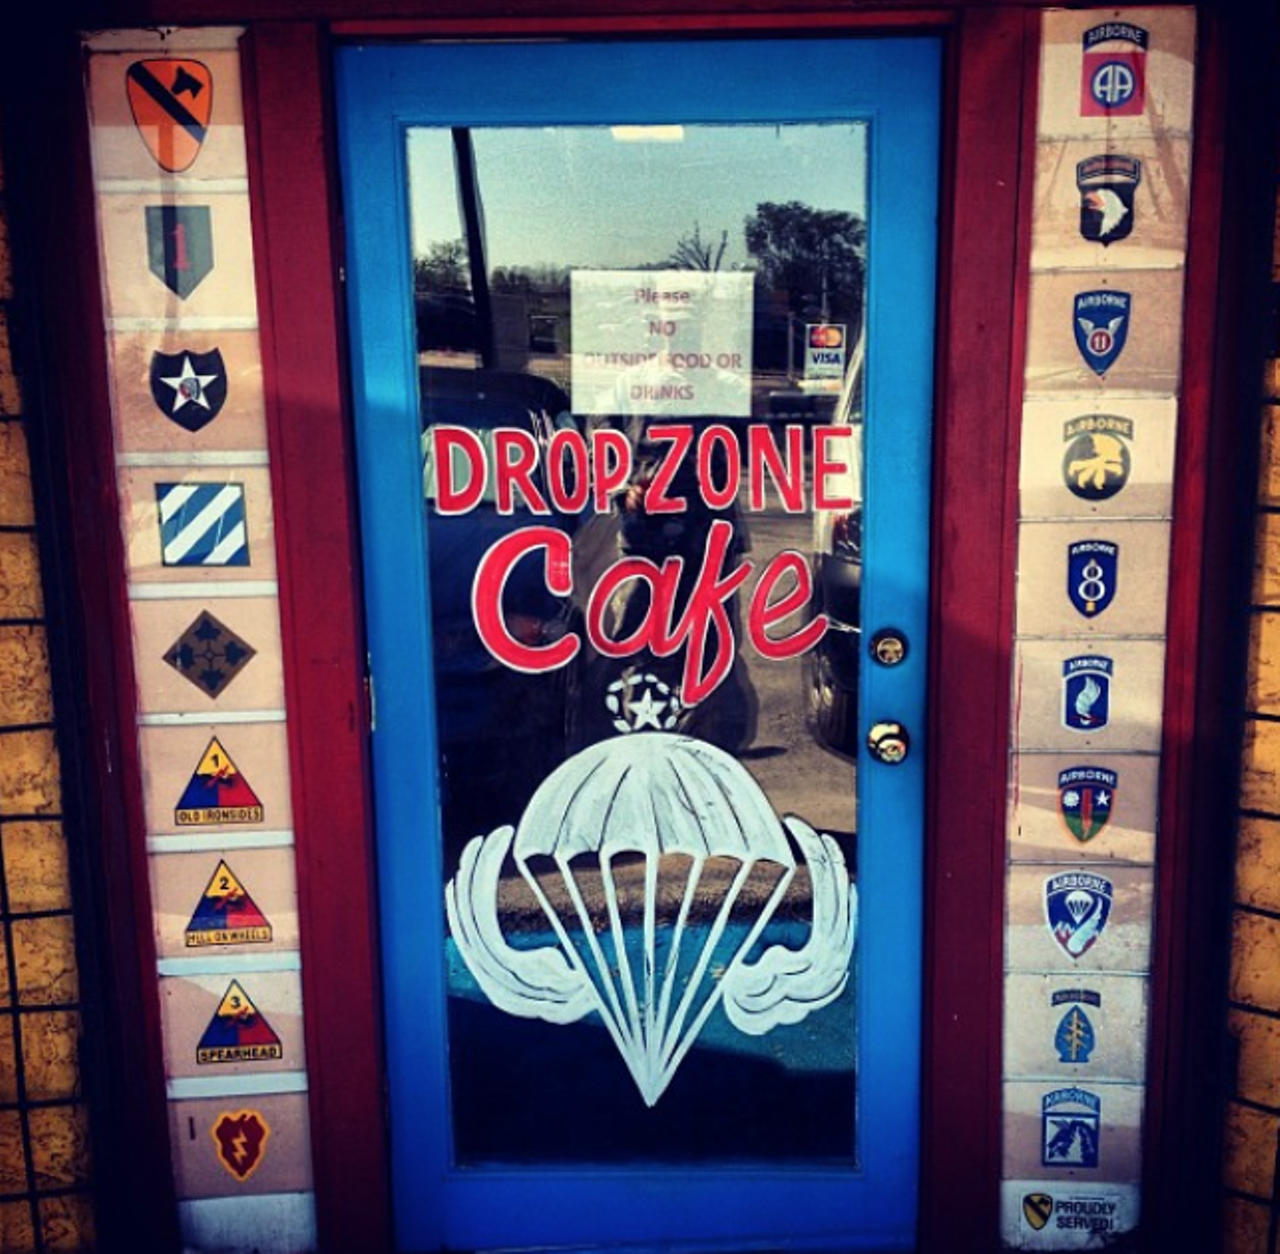 Drop Zone Cafe & Bar
1804 E Carson, (210) 314-7590, dropzonecafebar.com
Not too far from Fort Sam Houston you’ll find this local eatery that is all about serving the U.S. The East Side cafe was first opened by by retired Army Command Sgt. Major Ed Fernandez and his wife Hope, though retired Army Sgt. 1st Class Ken Gray has since leased the cafe from the couple. While lot is up for grabs on the menu — from Mexican dishes to American bites — fellow veterans can look forward to SOS (that’s meat in white gravy on biscuits to civilians).
Photo via Instagram / crispinburke